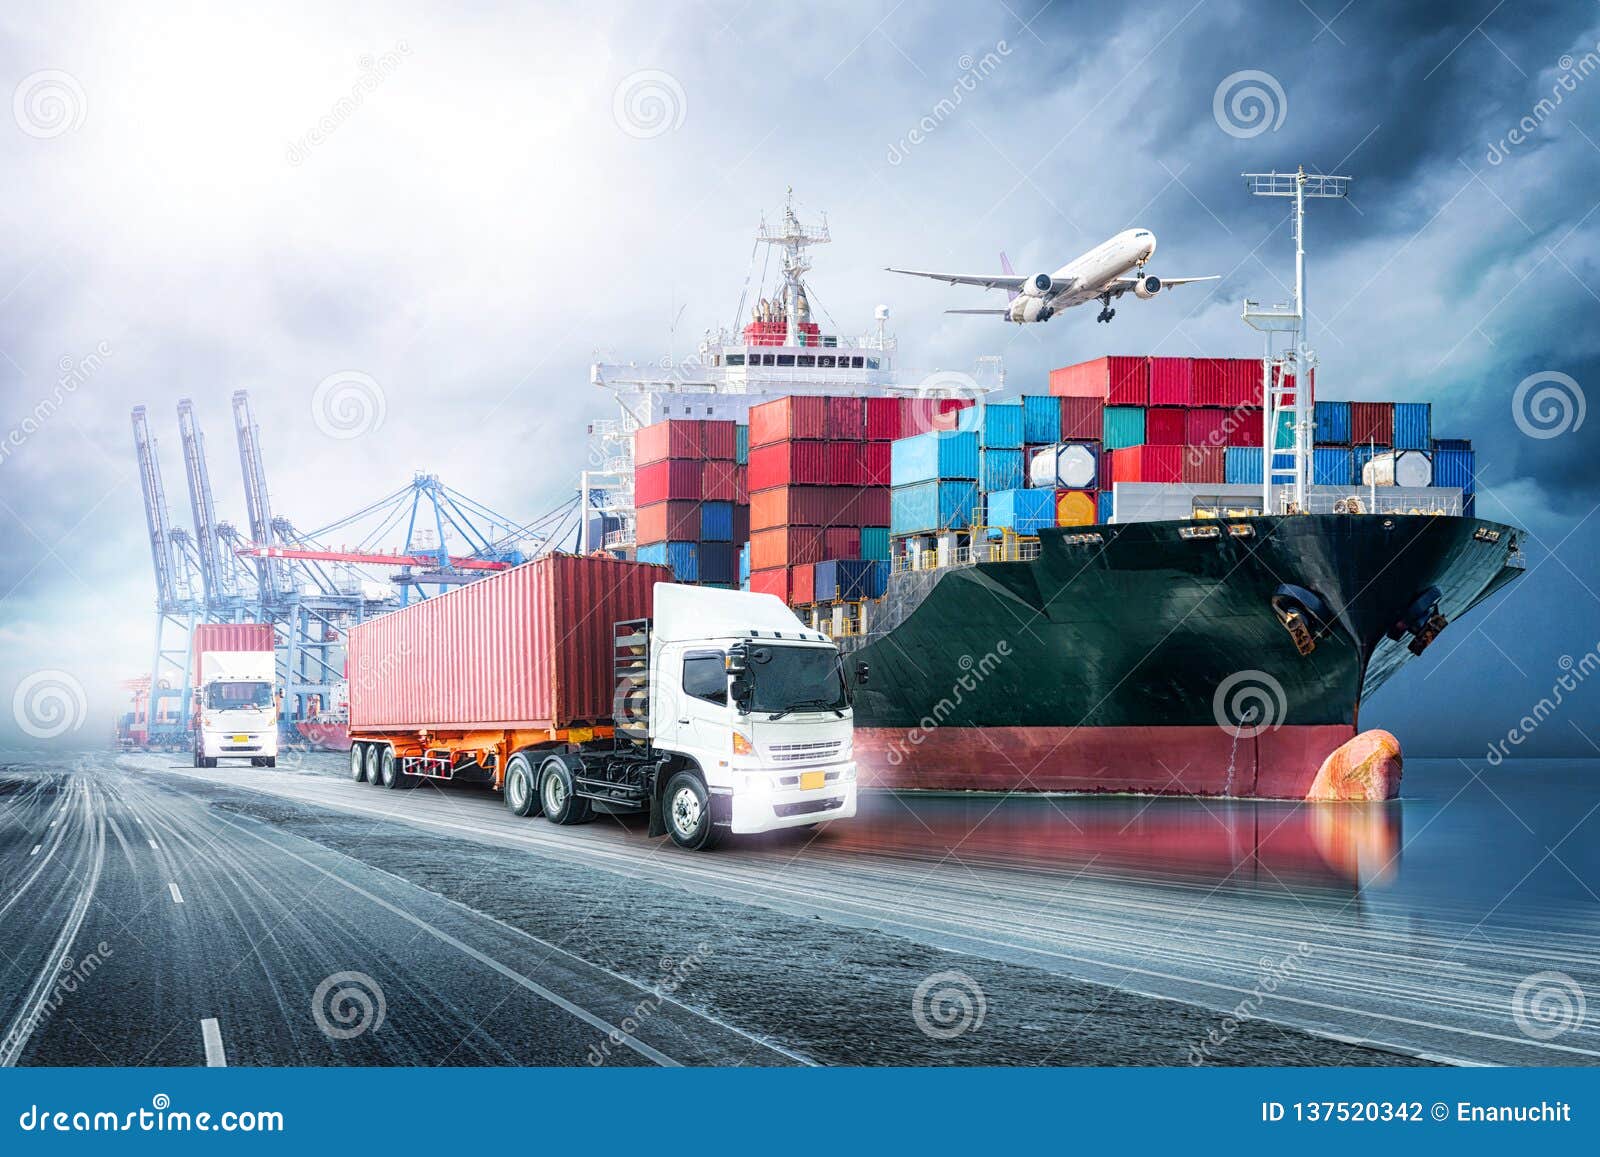 logistics import export background and transport industry of container cargo freight ship